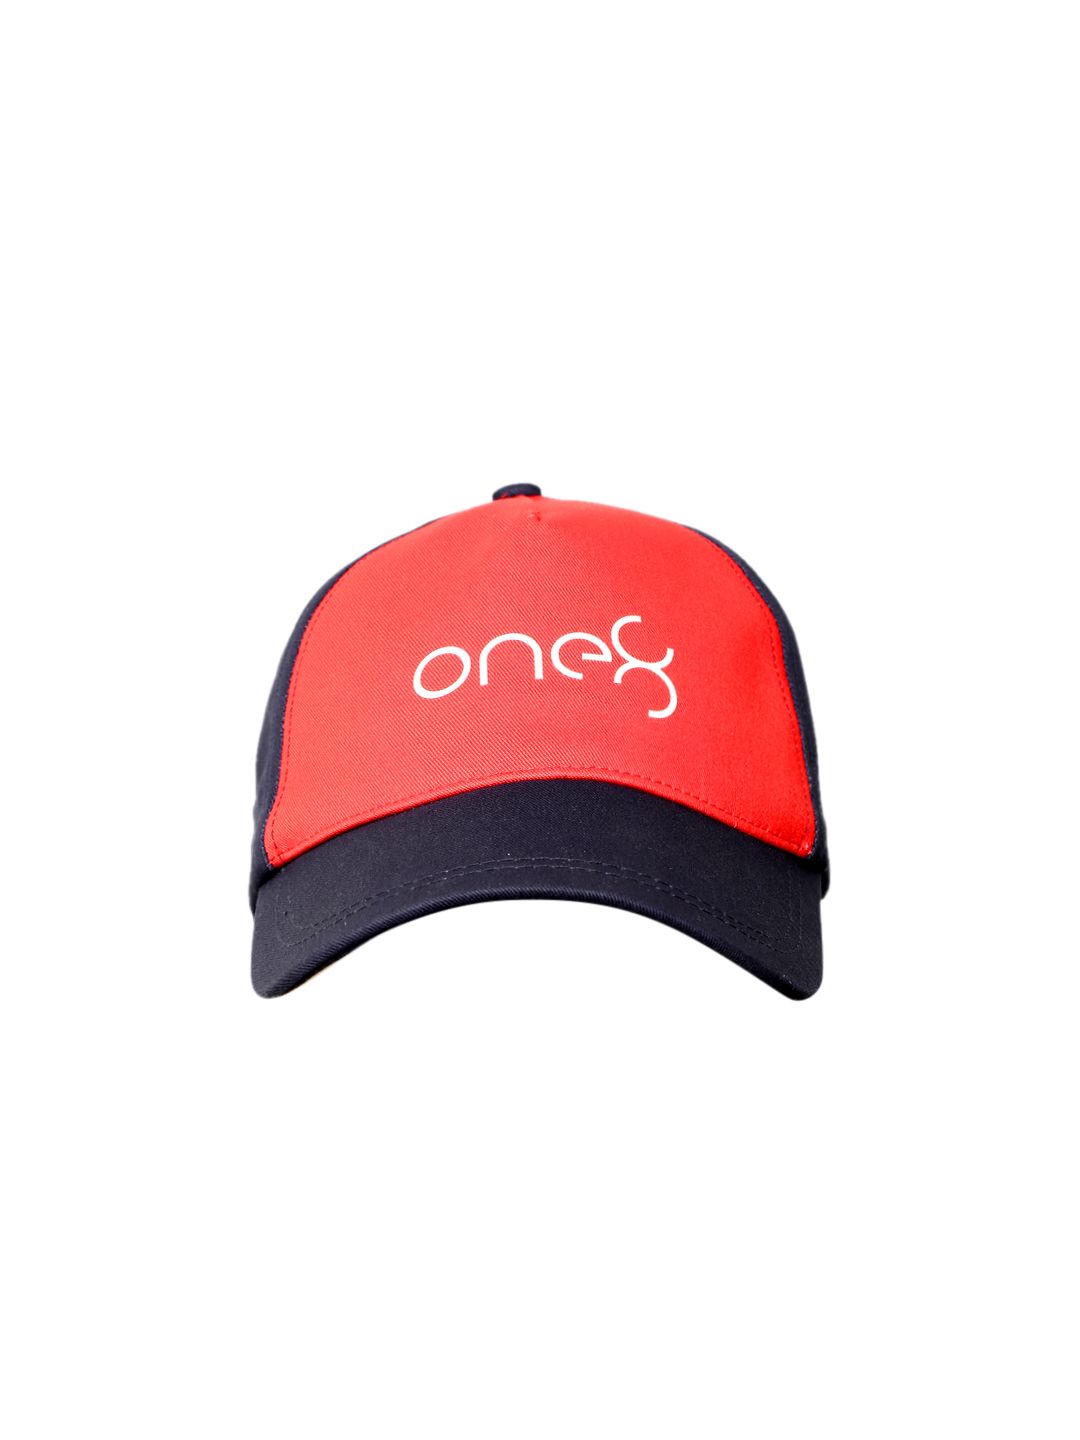 one8 x PUMA Unisex Coral Red & Navy Blue Colourblocked Cotton Baseball Cap Price in India